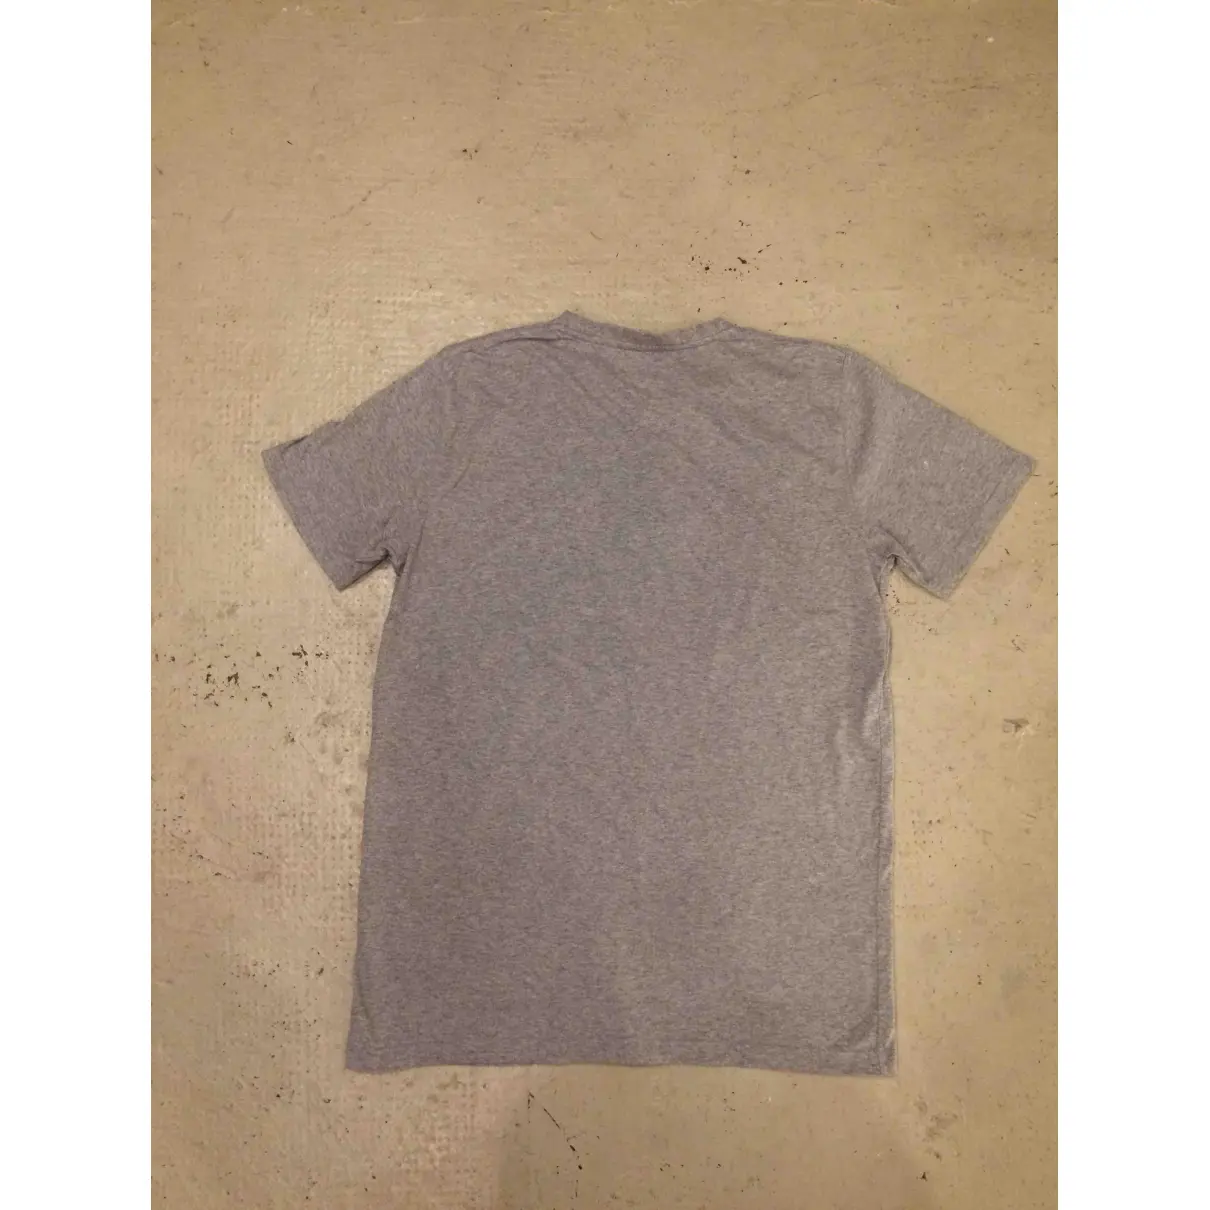 Buy Norse Projects Grey Cotton T-shirt online